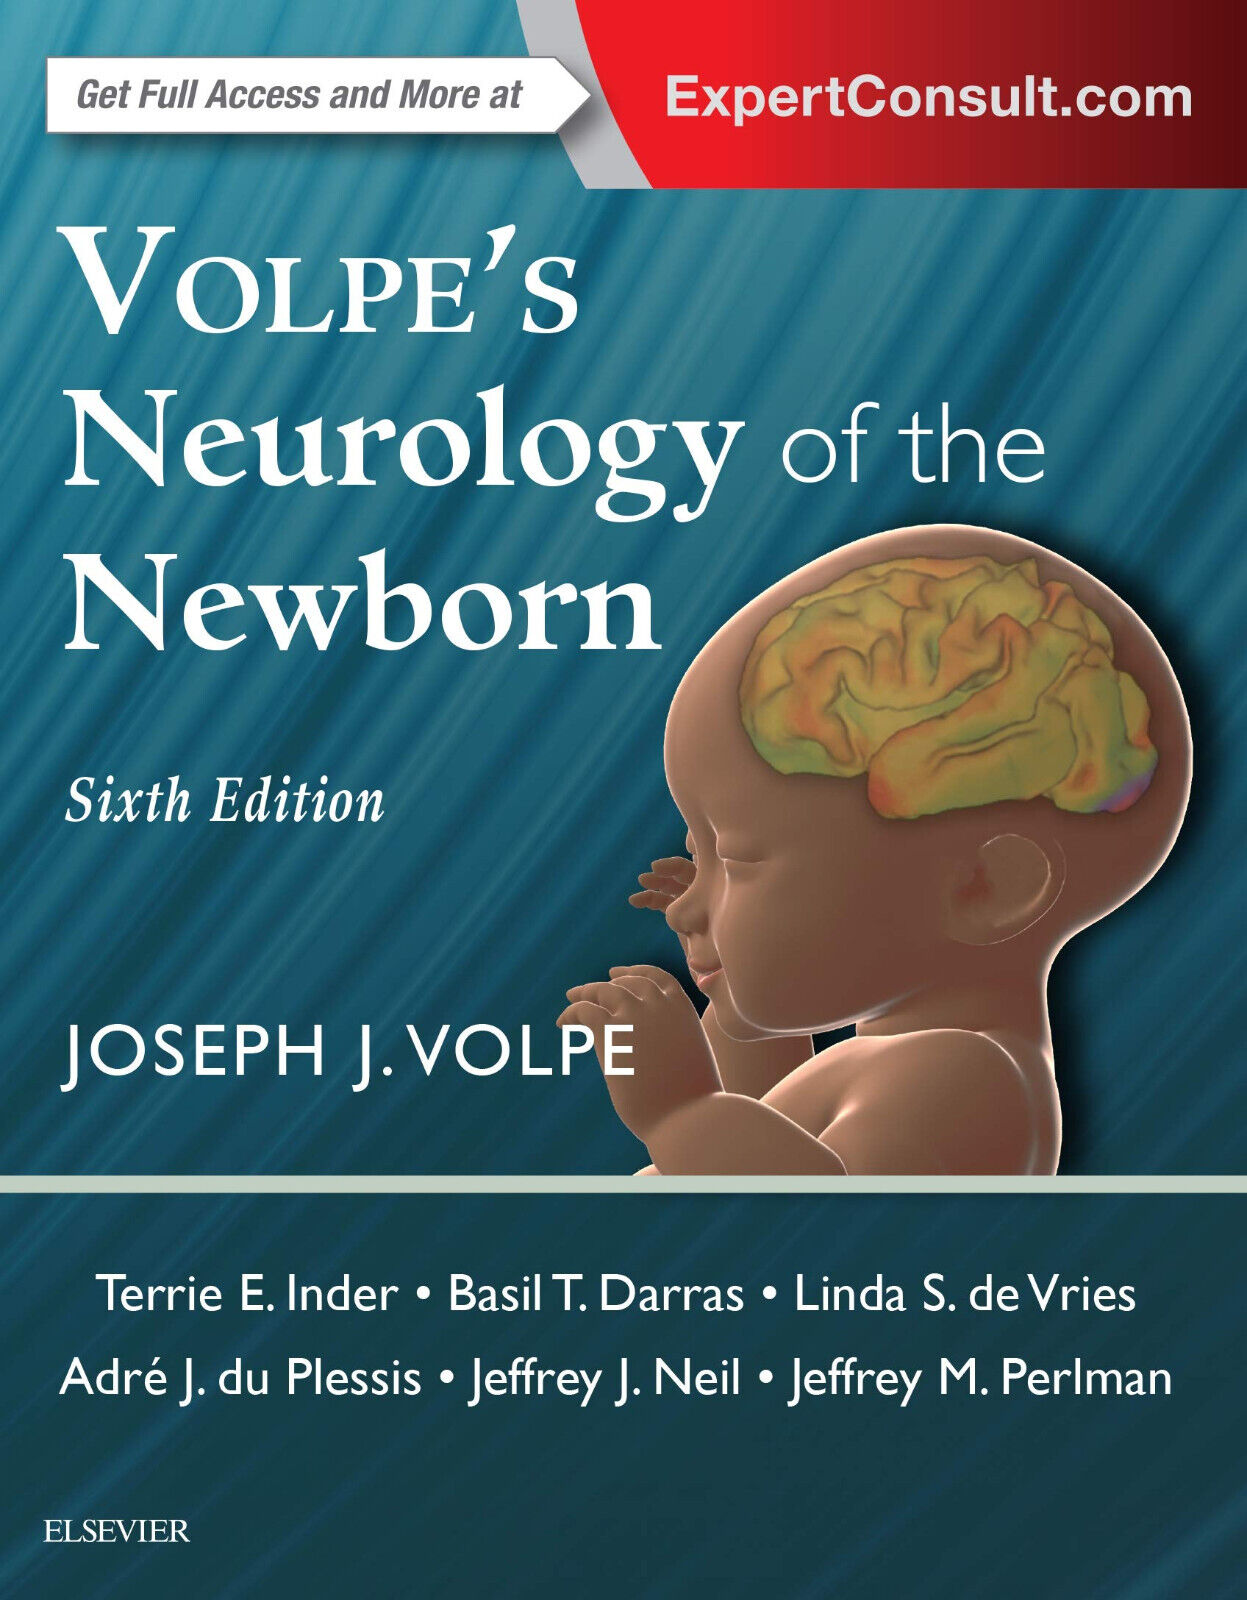 Volpe's Neurology of the Newborn - Elsevier, 2017 libro usato